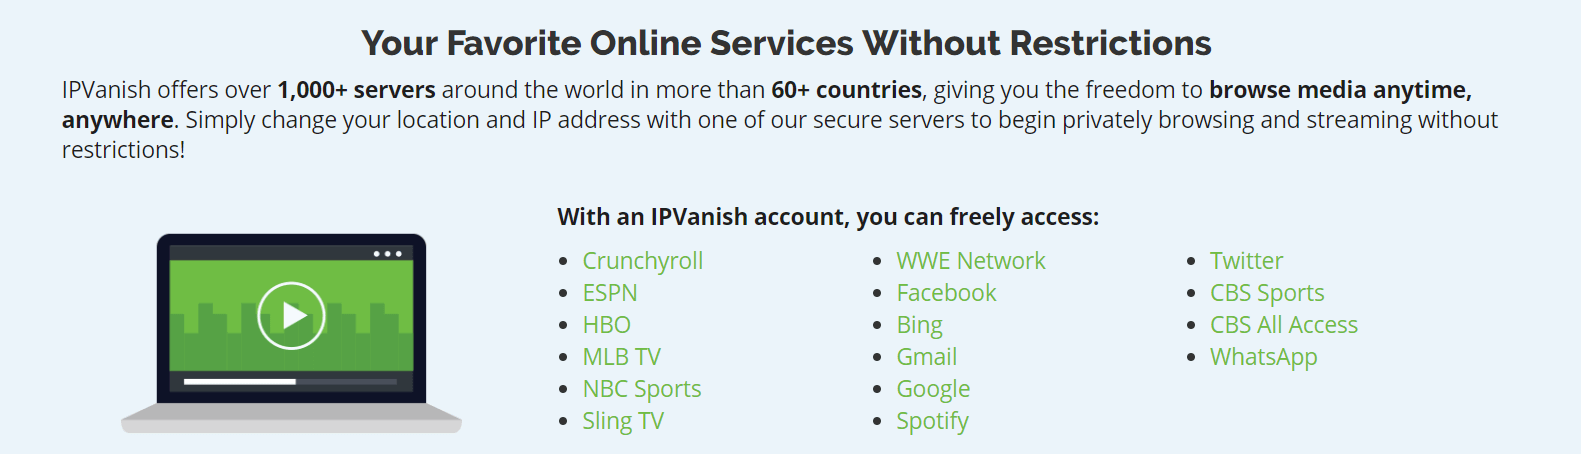 list of online services